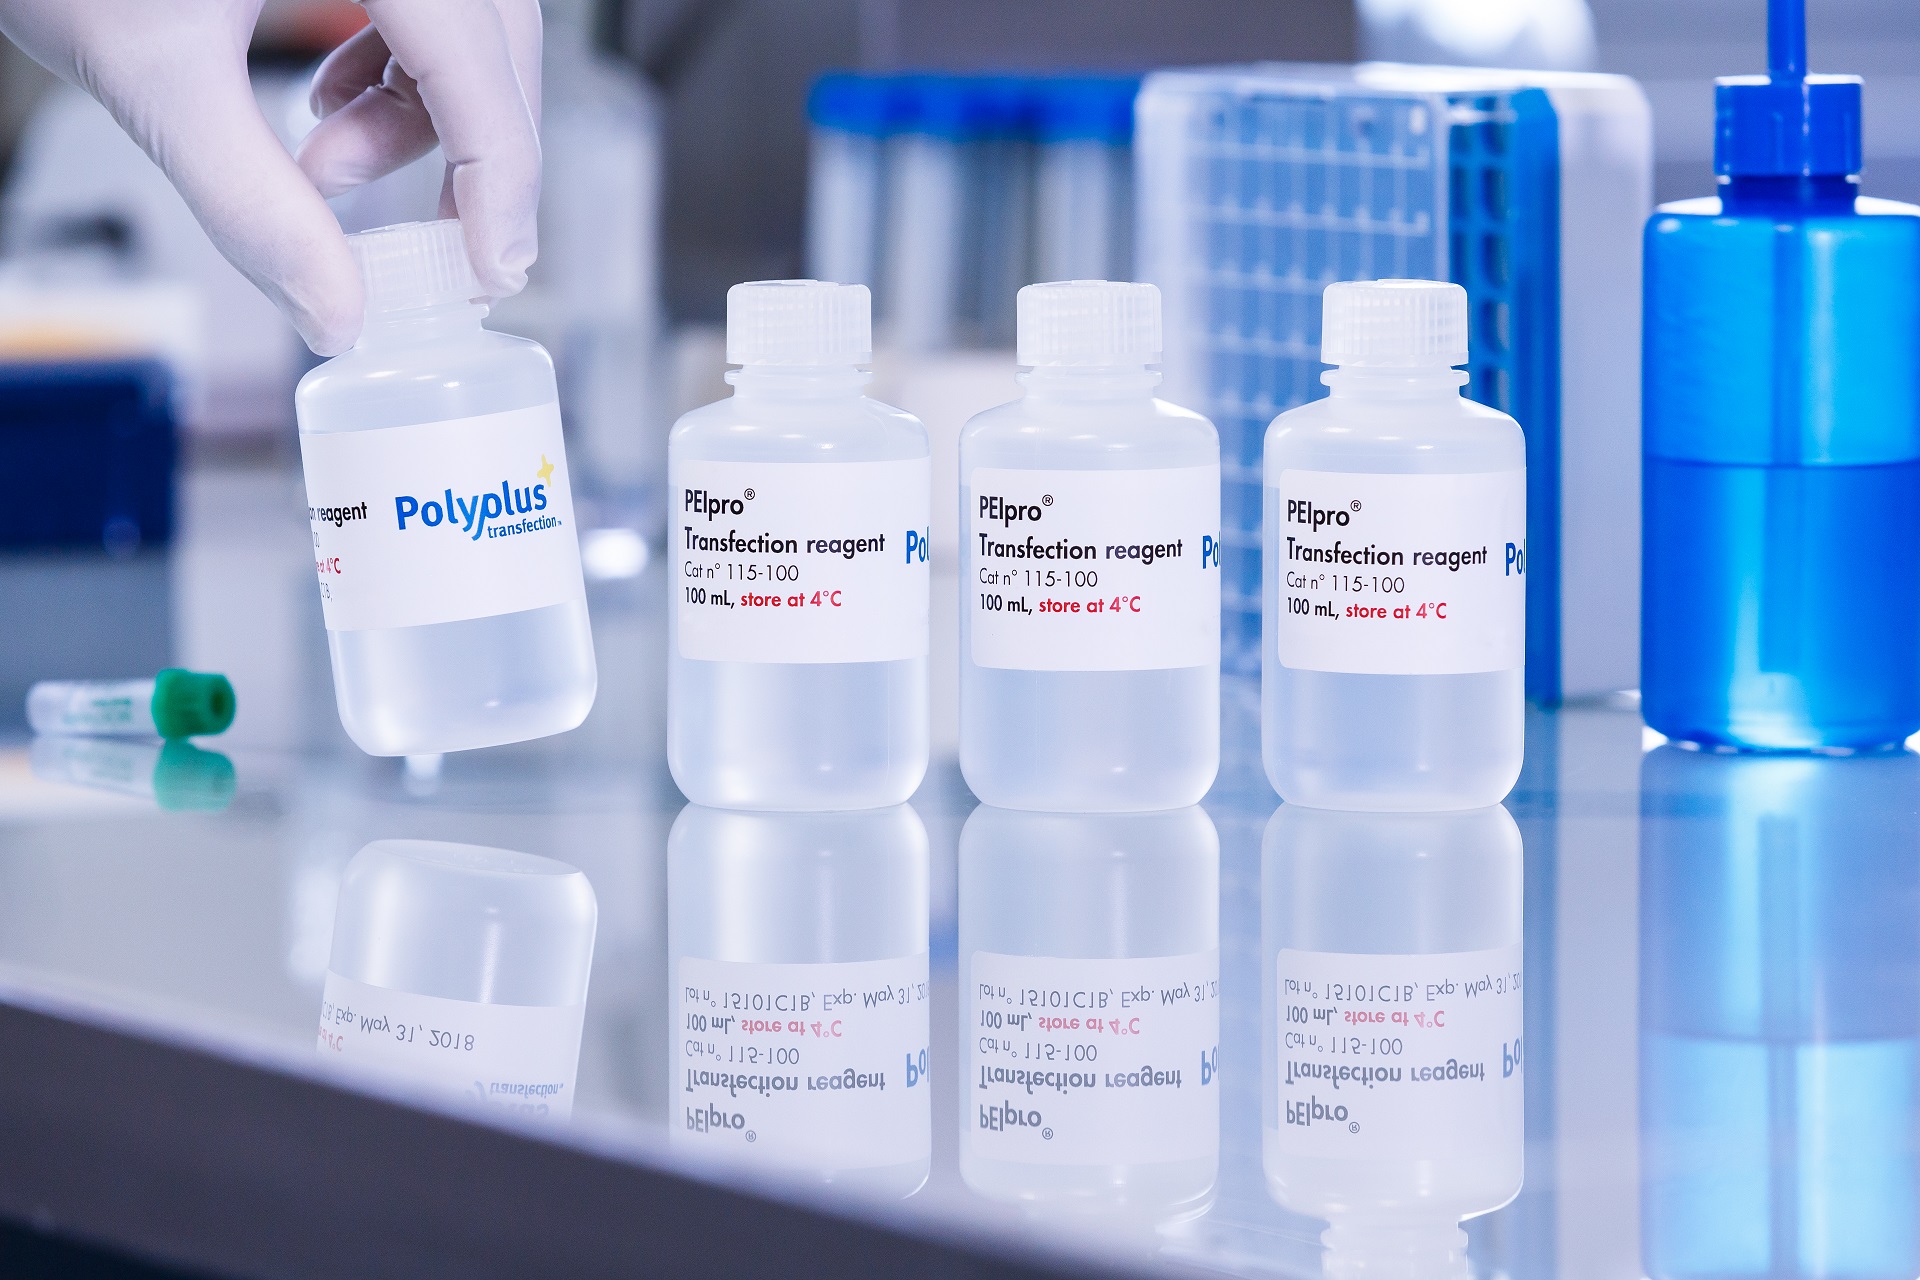 Polyplus-transfection launches the next generation PEI transfection reagent for bioproduction